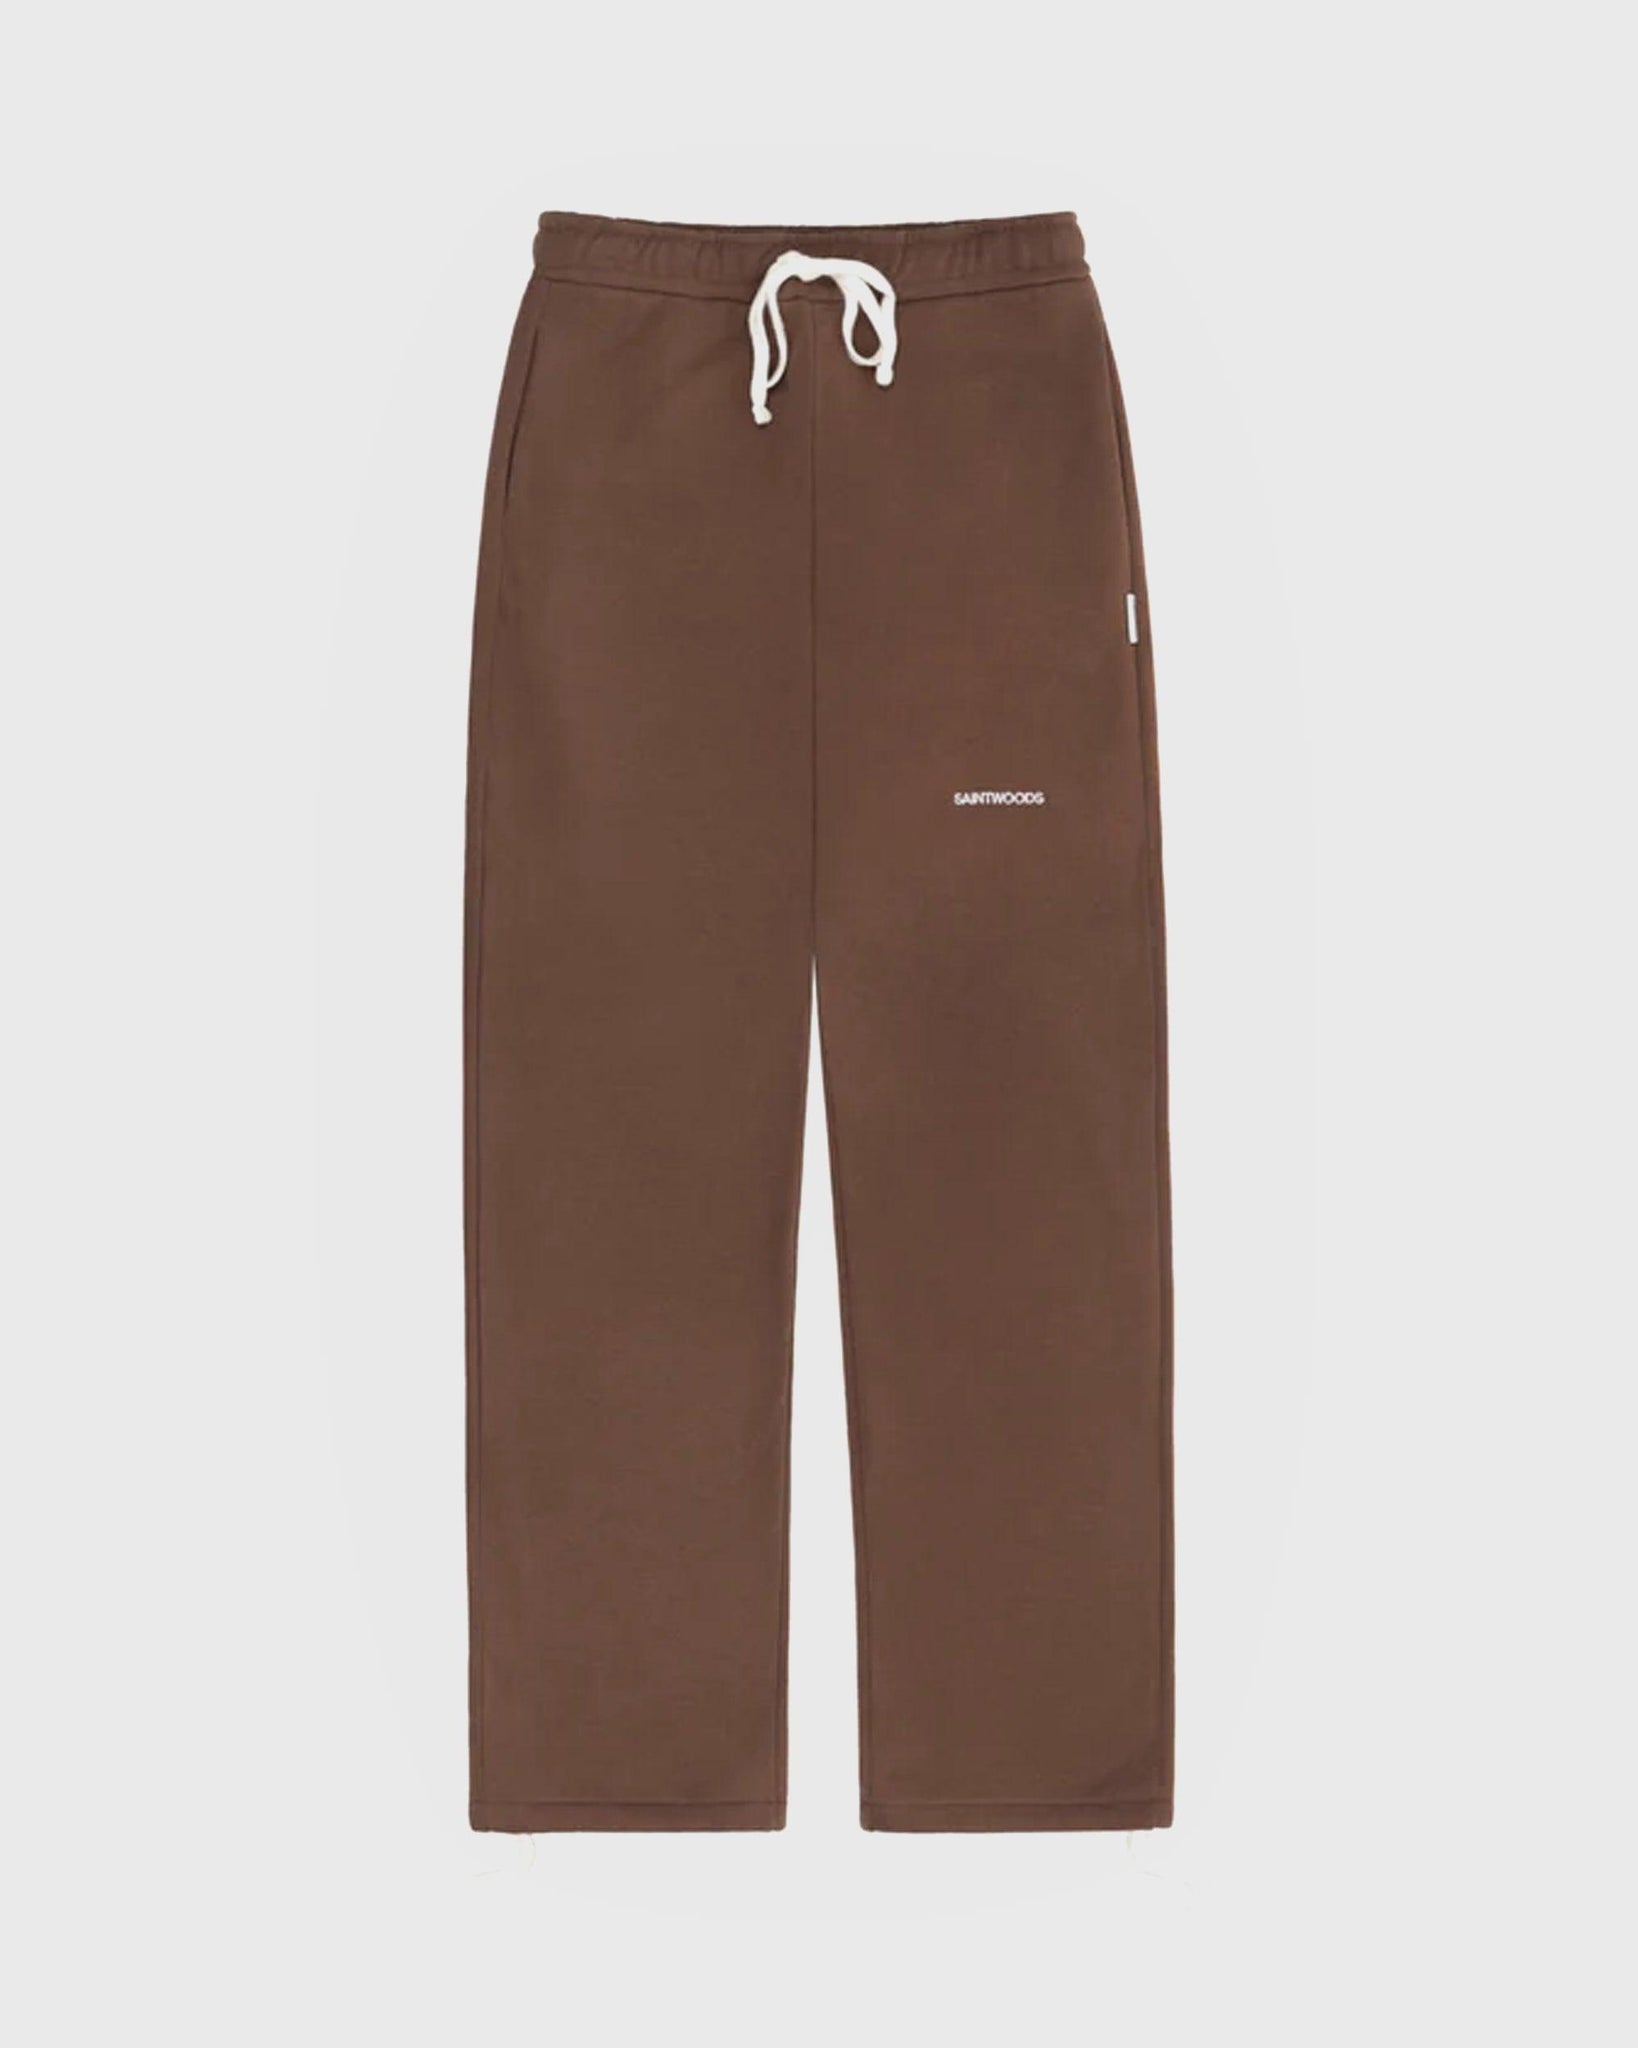 SW Sweatpants Brown - {{ collection.title }} - Chinatown Country Club 